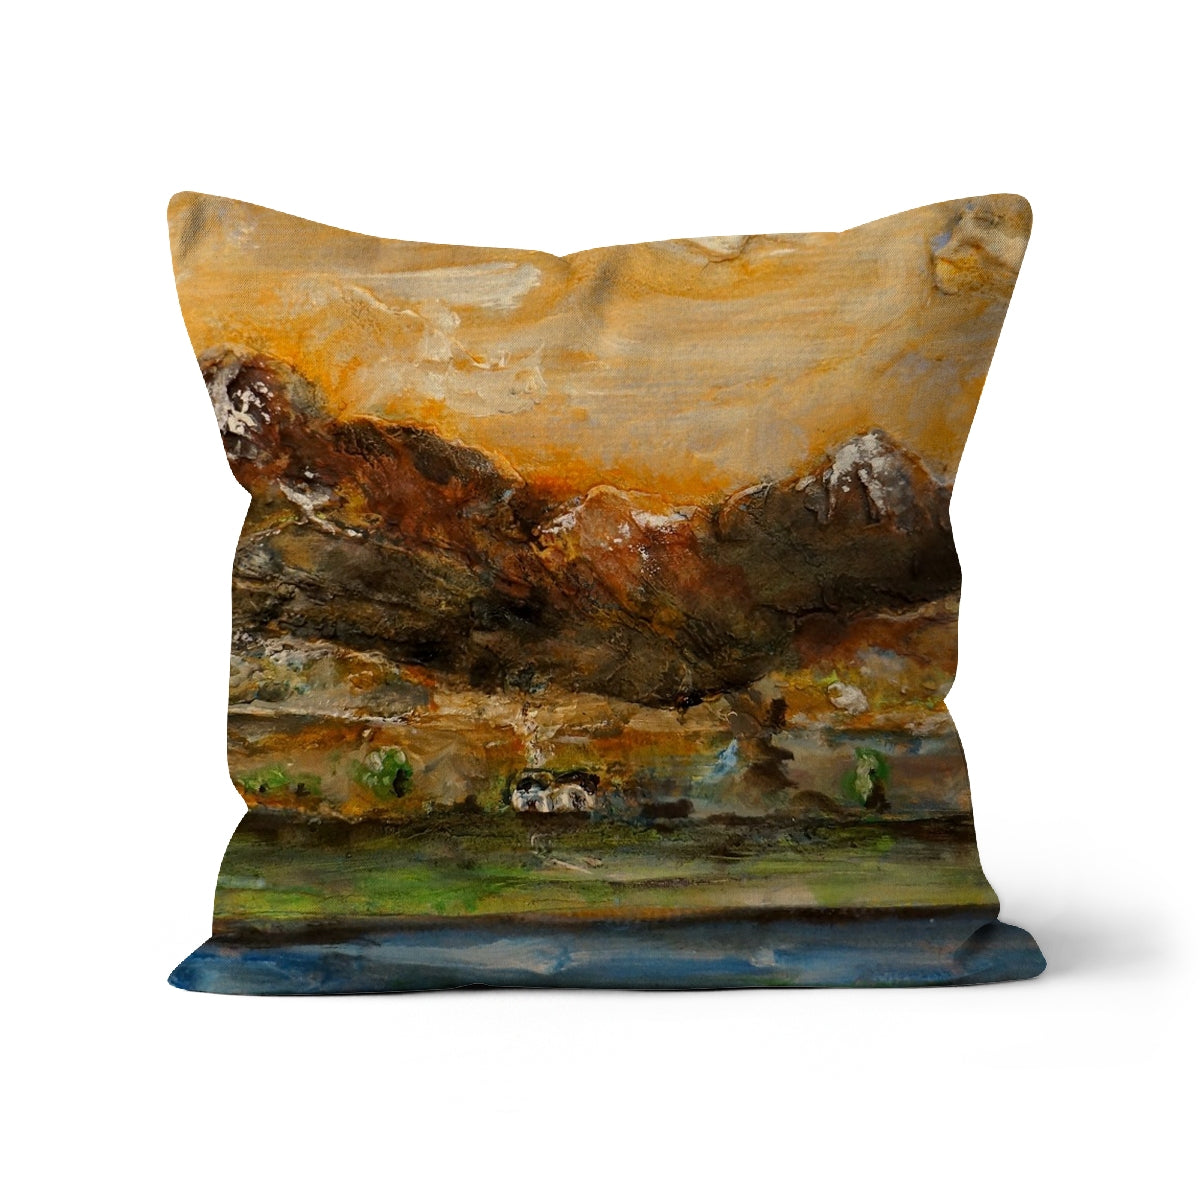 A Glencoe Cottage Art Gifts Cushion-Cushions-Glencoe Art Gallery-Faux Suede-16"x16"-Paintings, Prints, Homeware, Art Gifts From Scotland By Scottish Artist Kevin Hunter